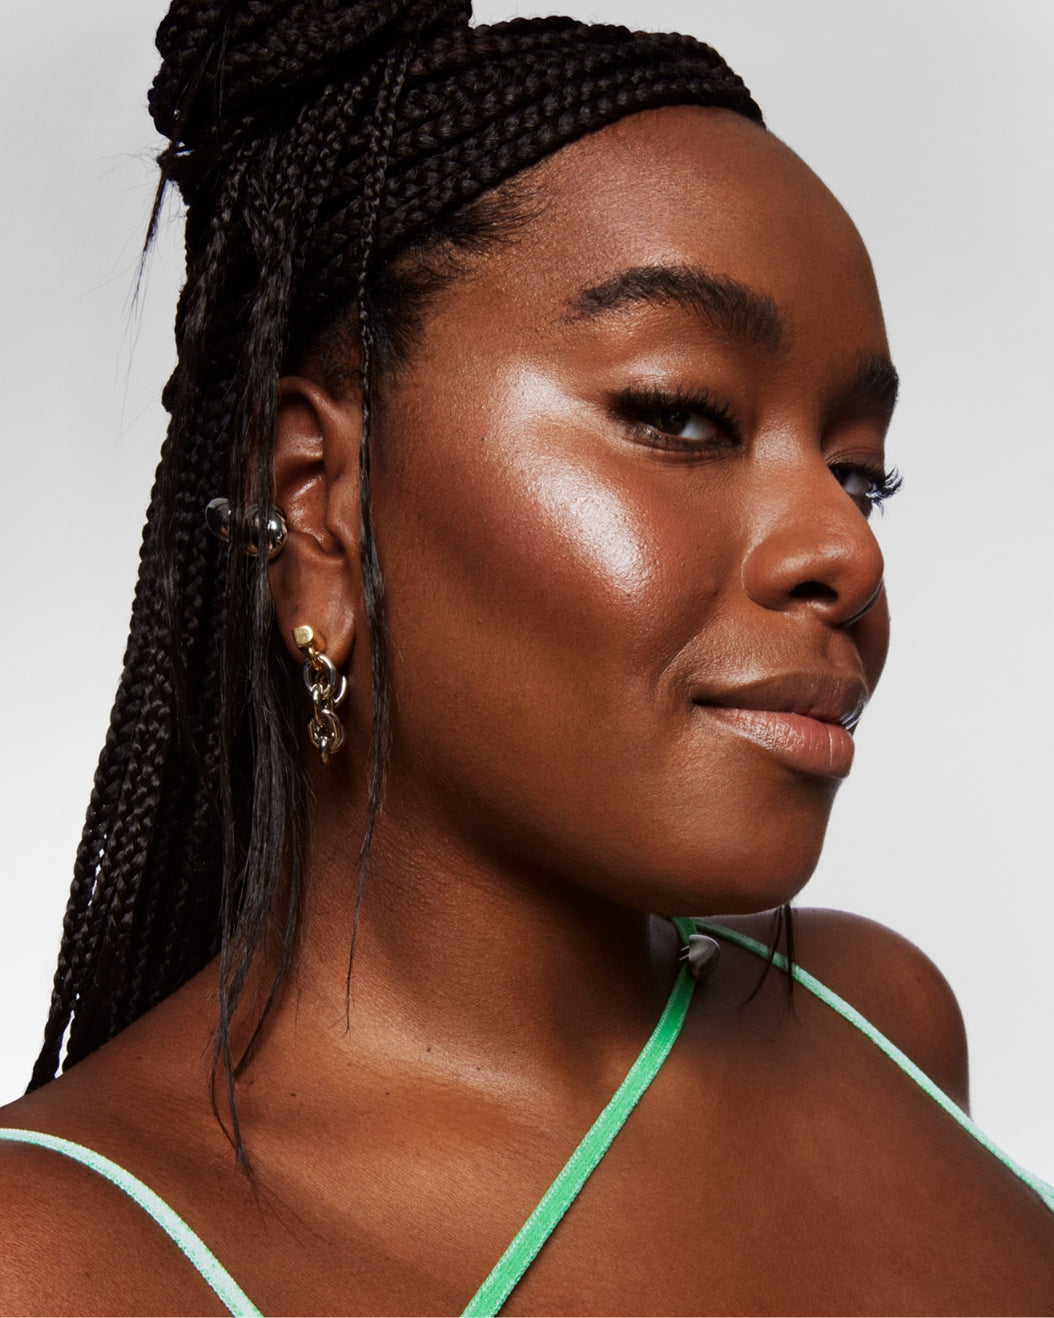 Model with a deep glowy complexion wears Milk Makeup Highlighter on a white background.